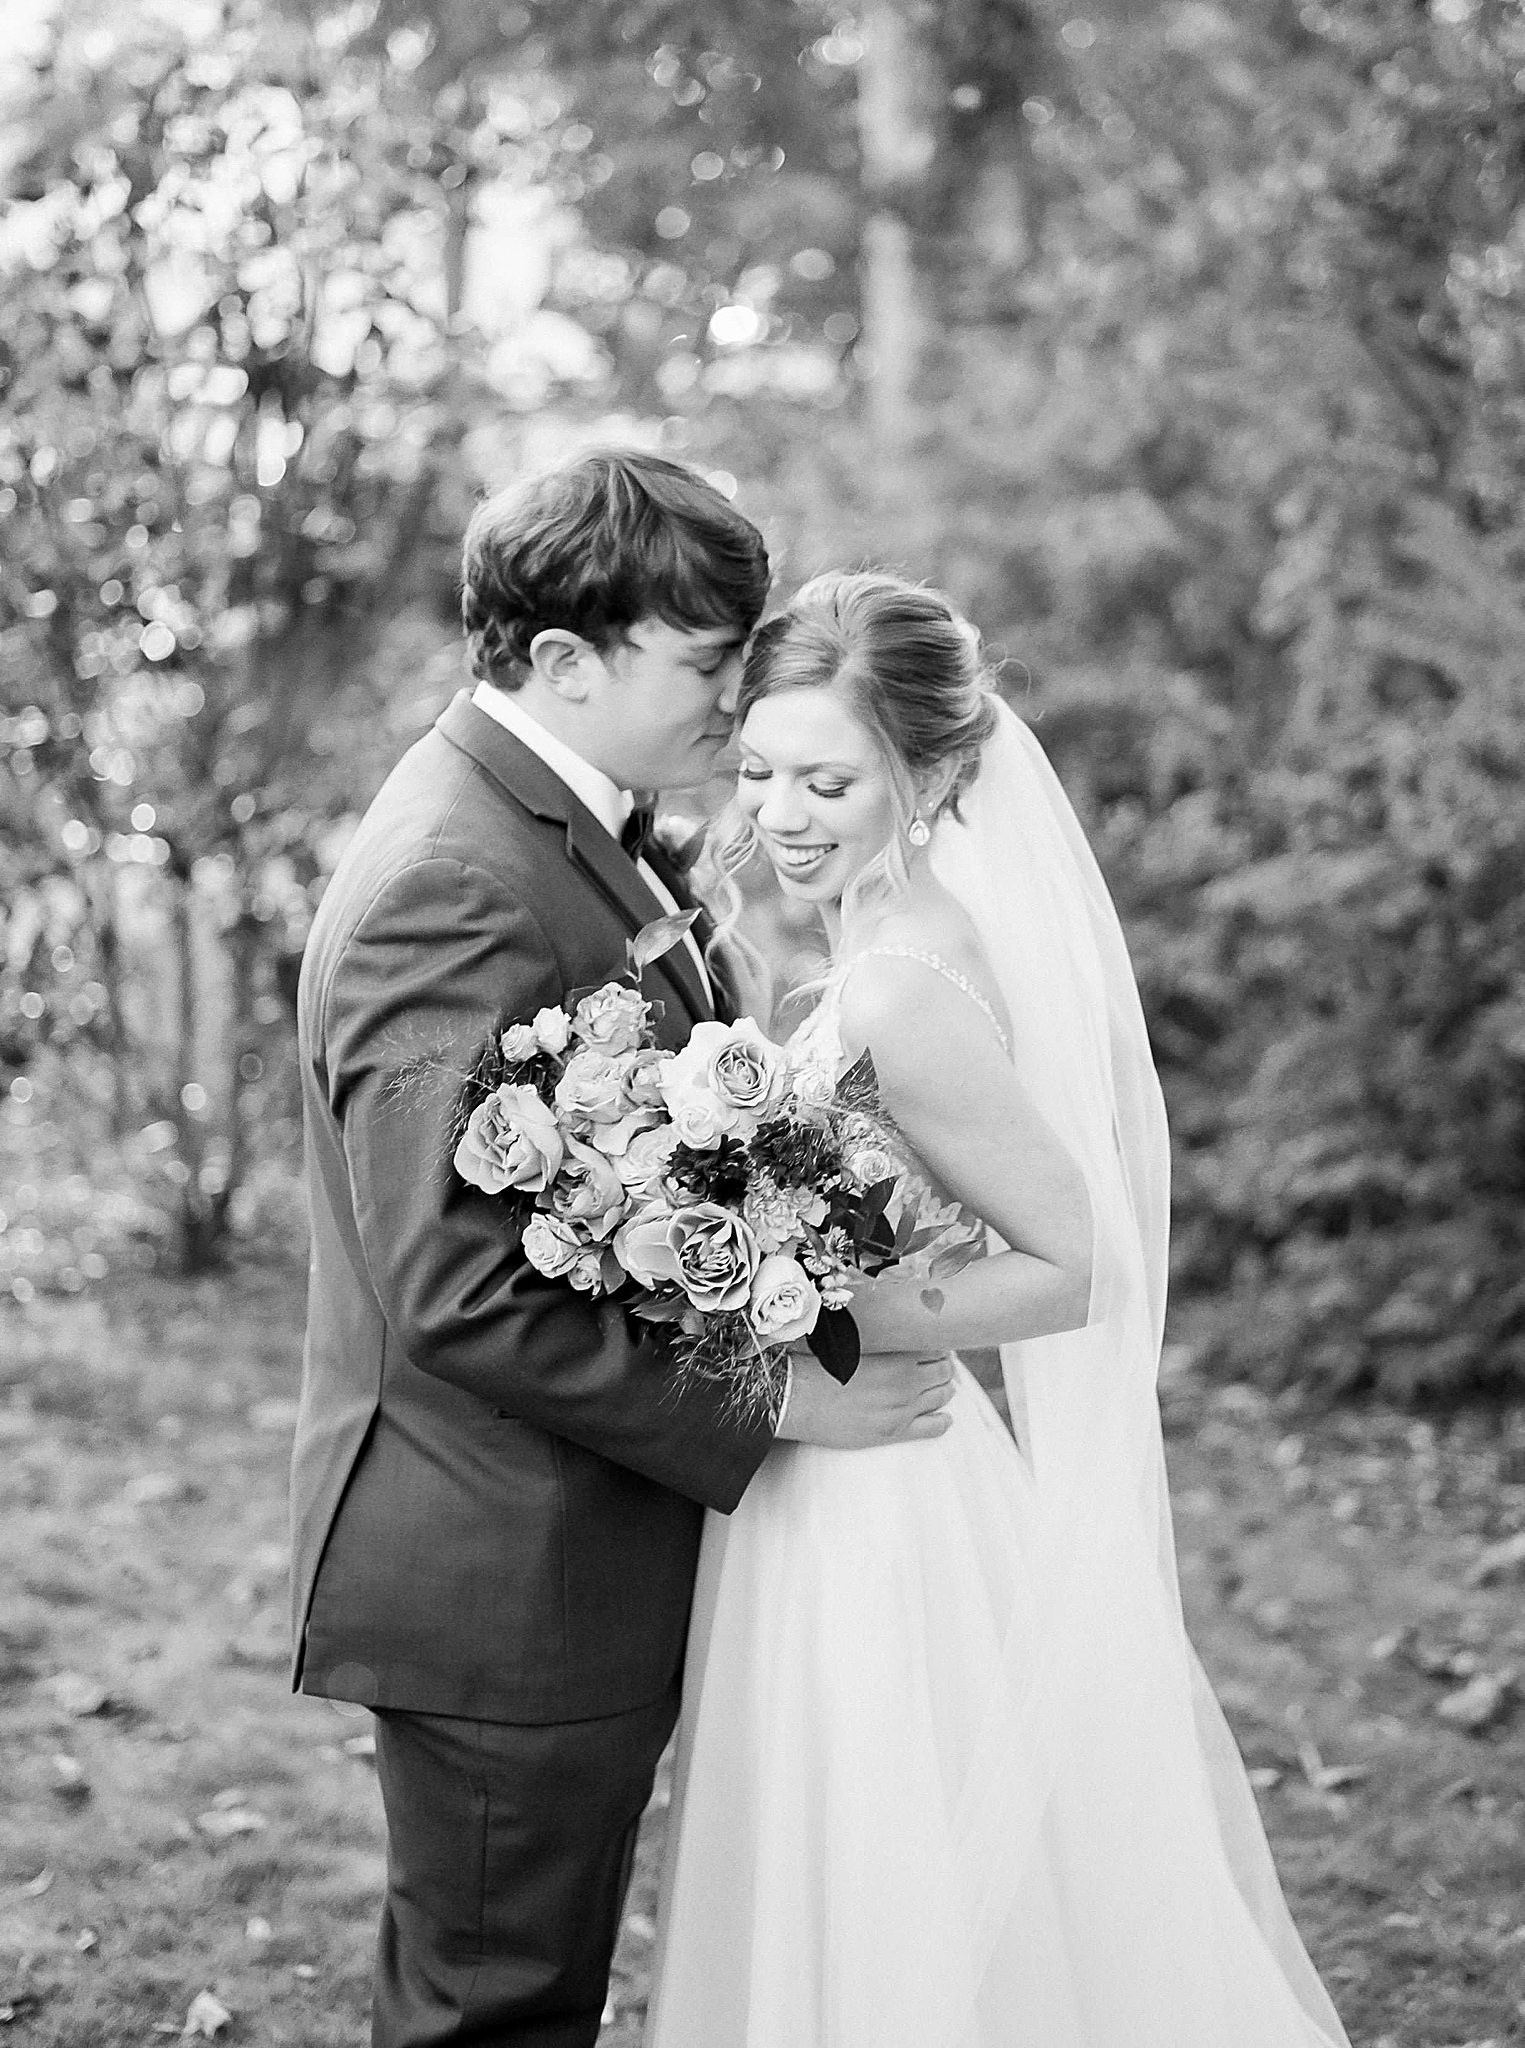 portraits of bride and groom at Ritchie Hill in Concord NC